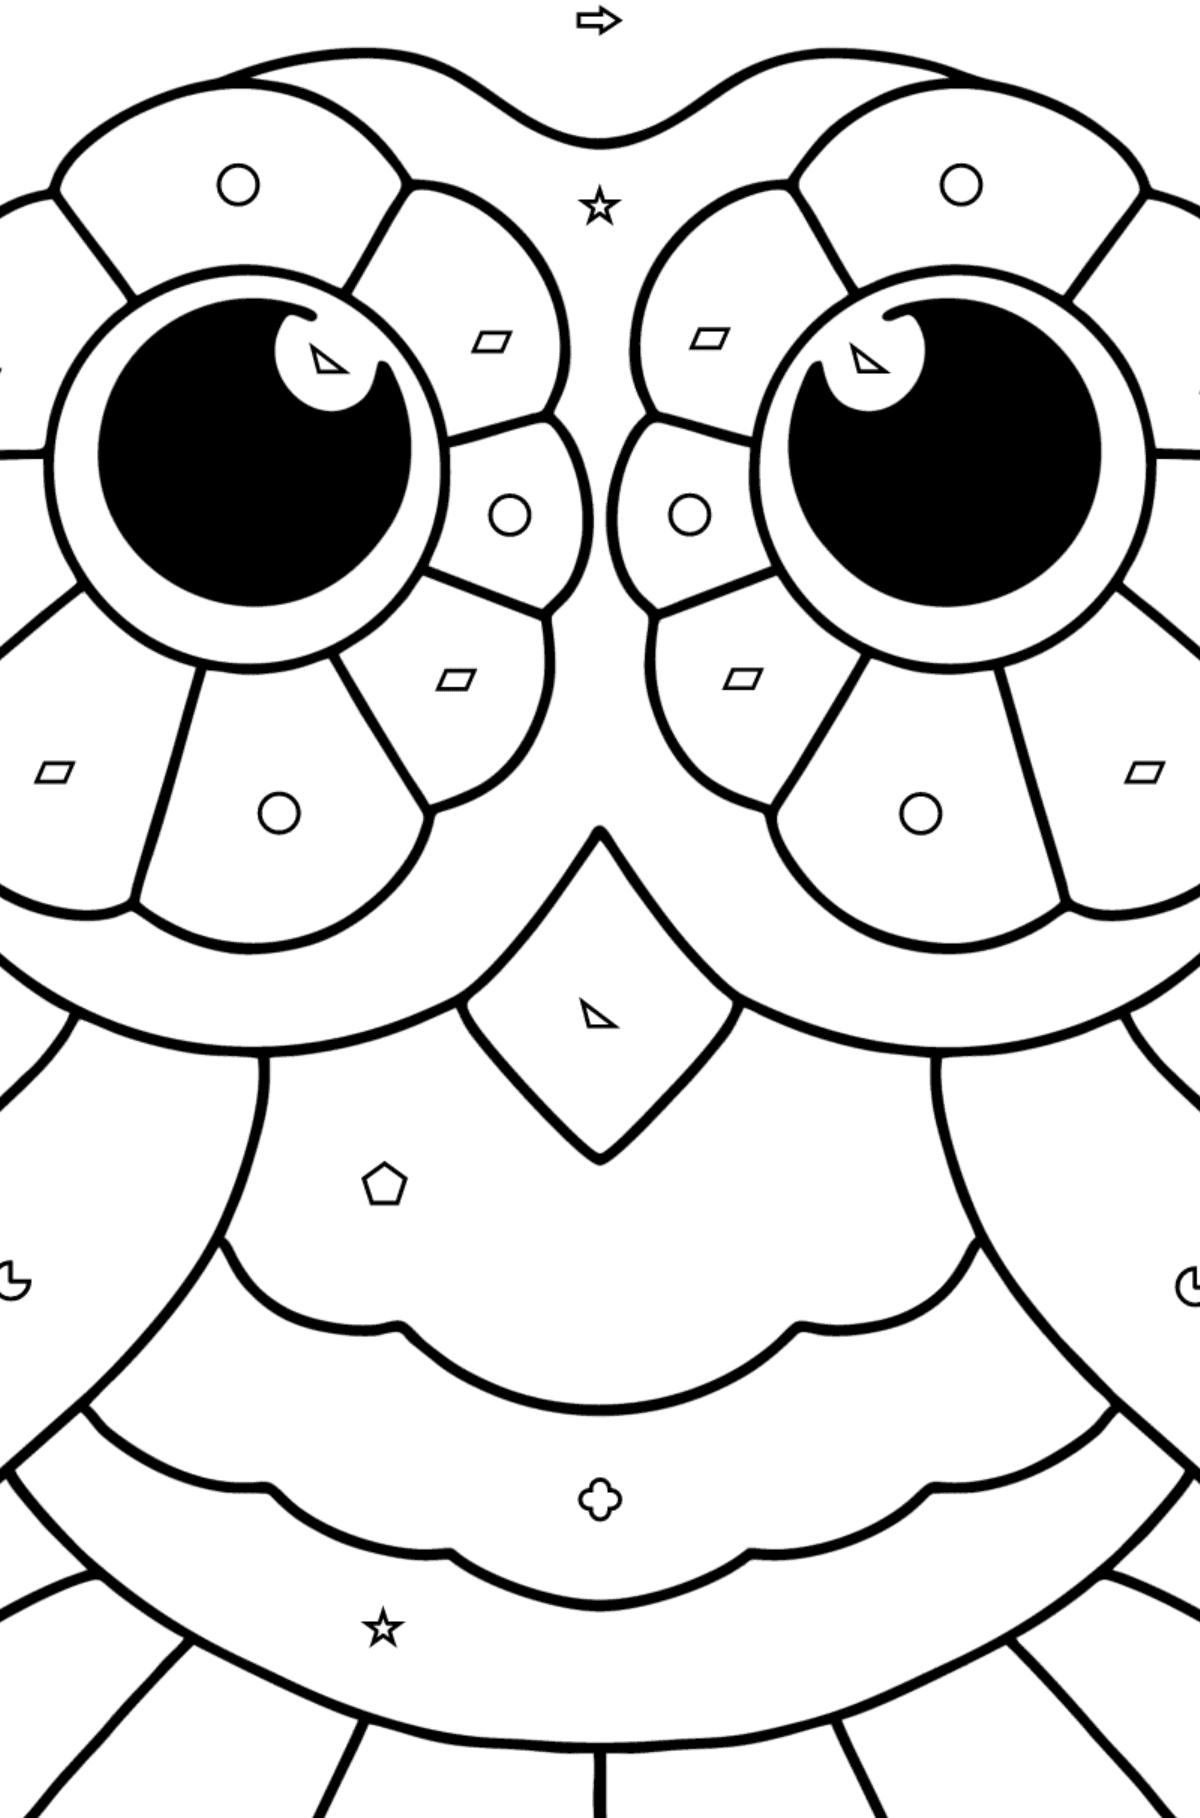 Easy stress relief coloring page - Owl - Coloring by Geometric Shapes for Kids